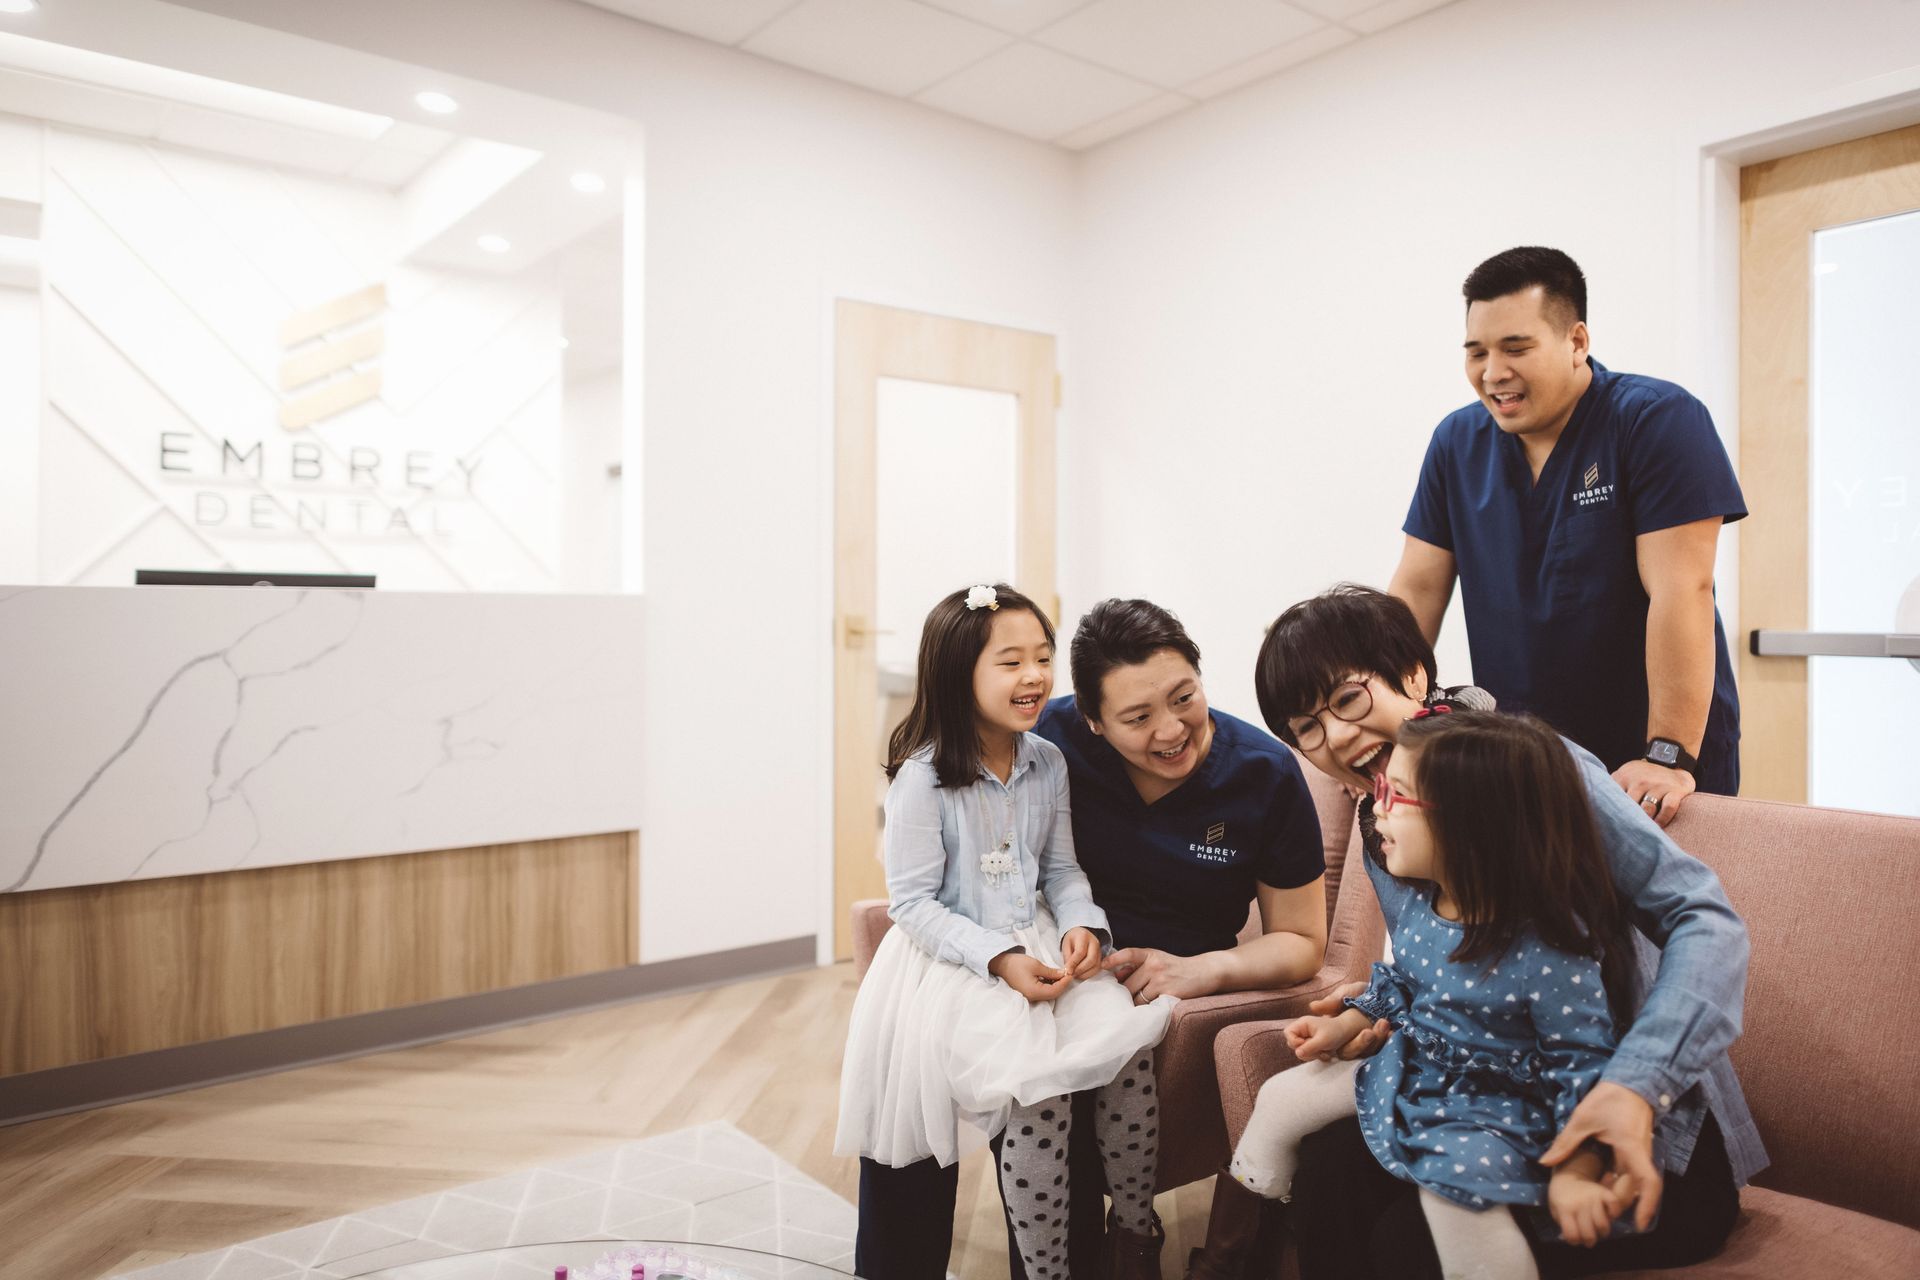 lim family sitting in the waiting room area smiling and happy together at Embrey Family Dental